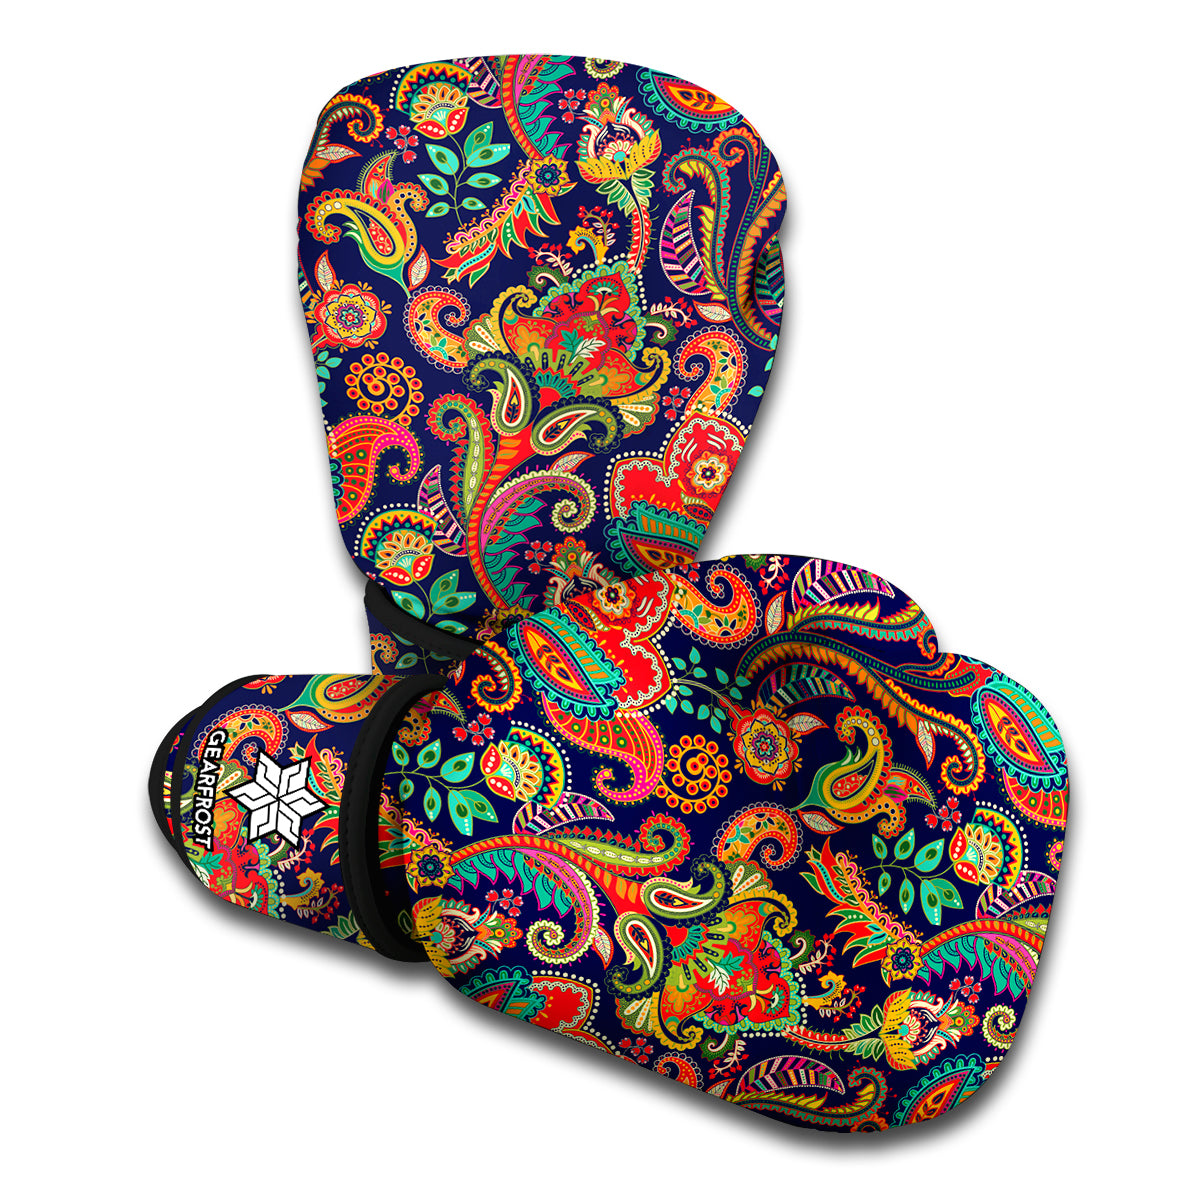 Indian Paisley Pattern Print Boxing Gloves